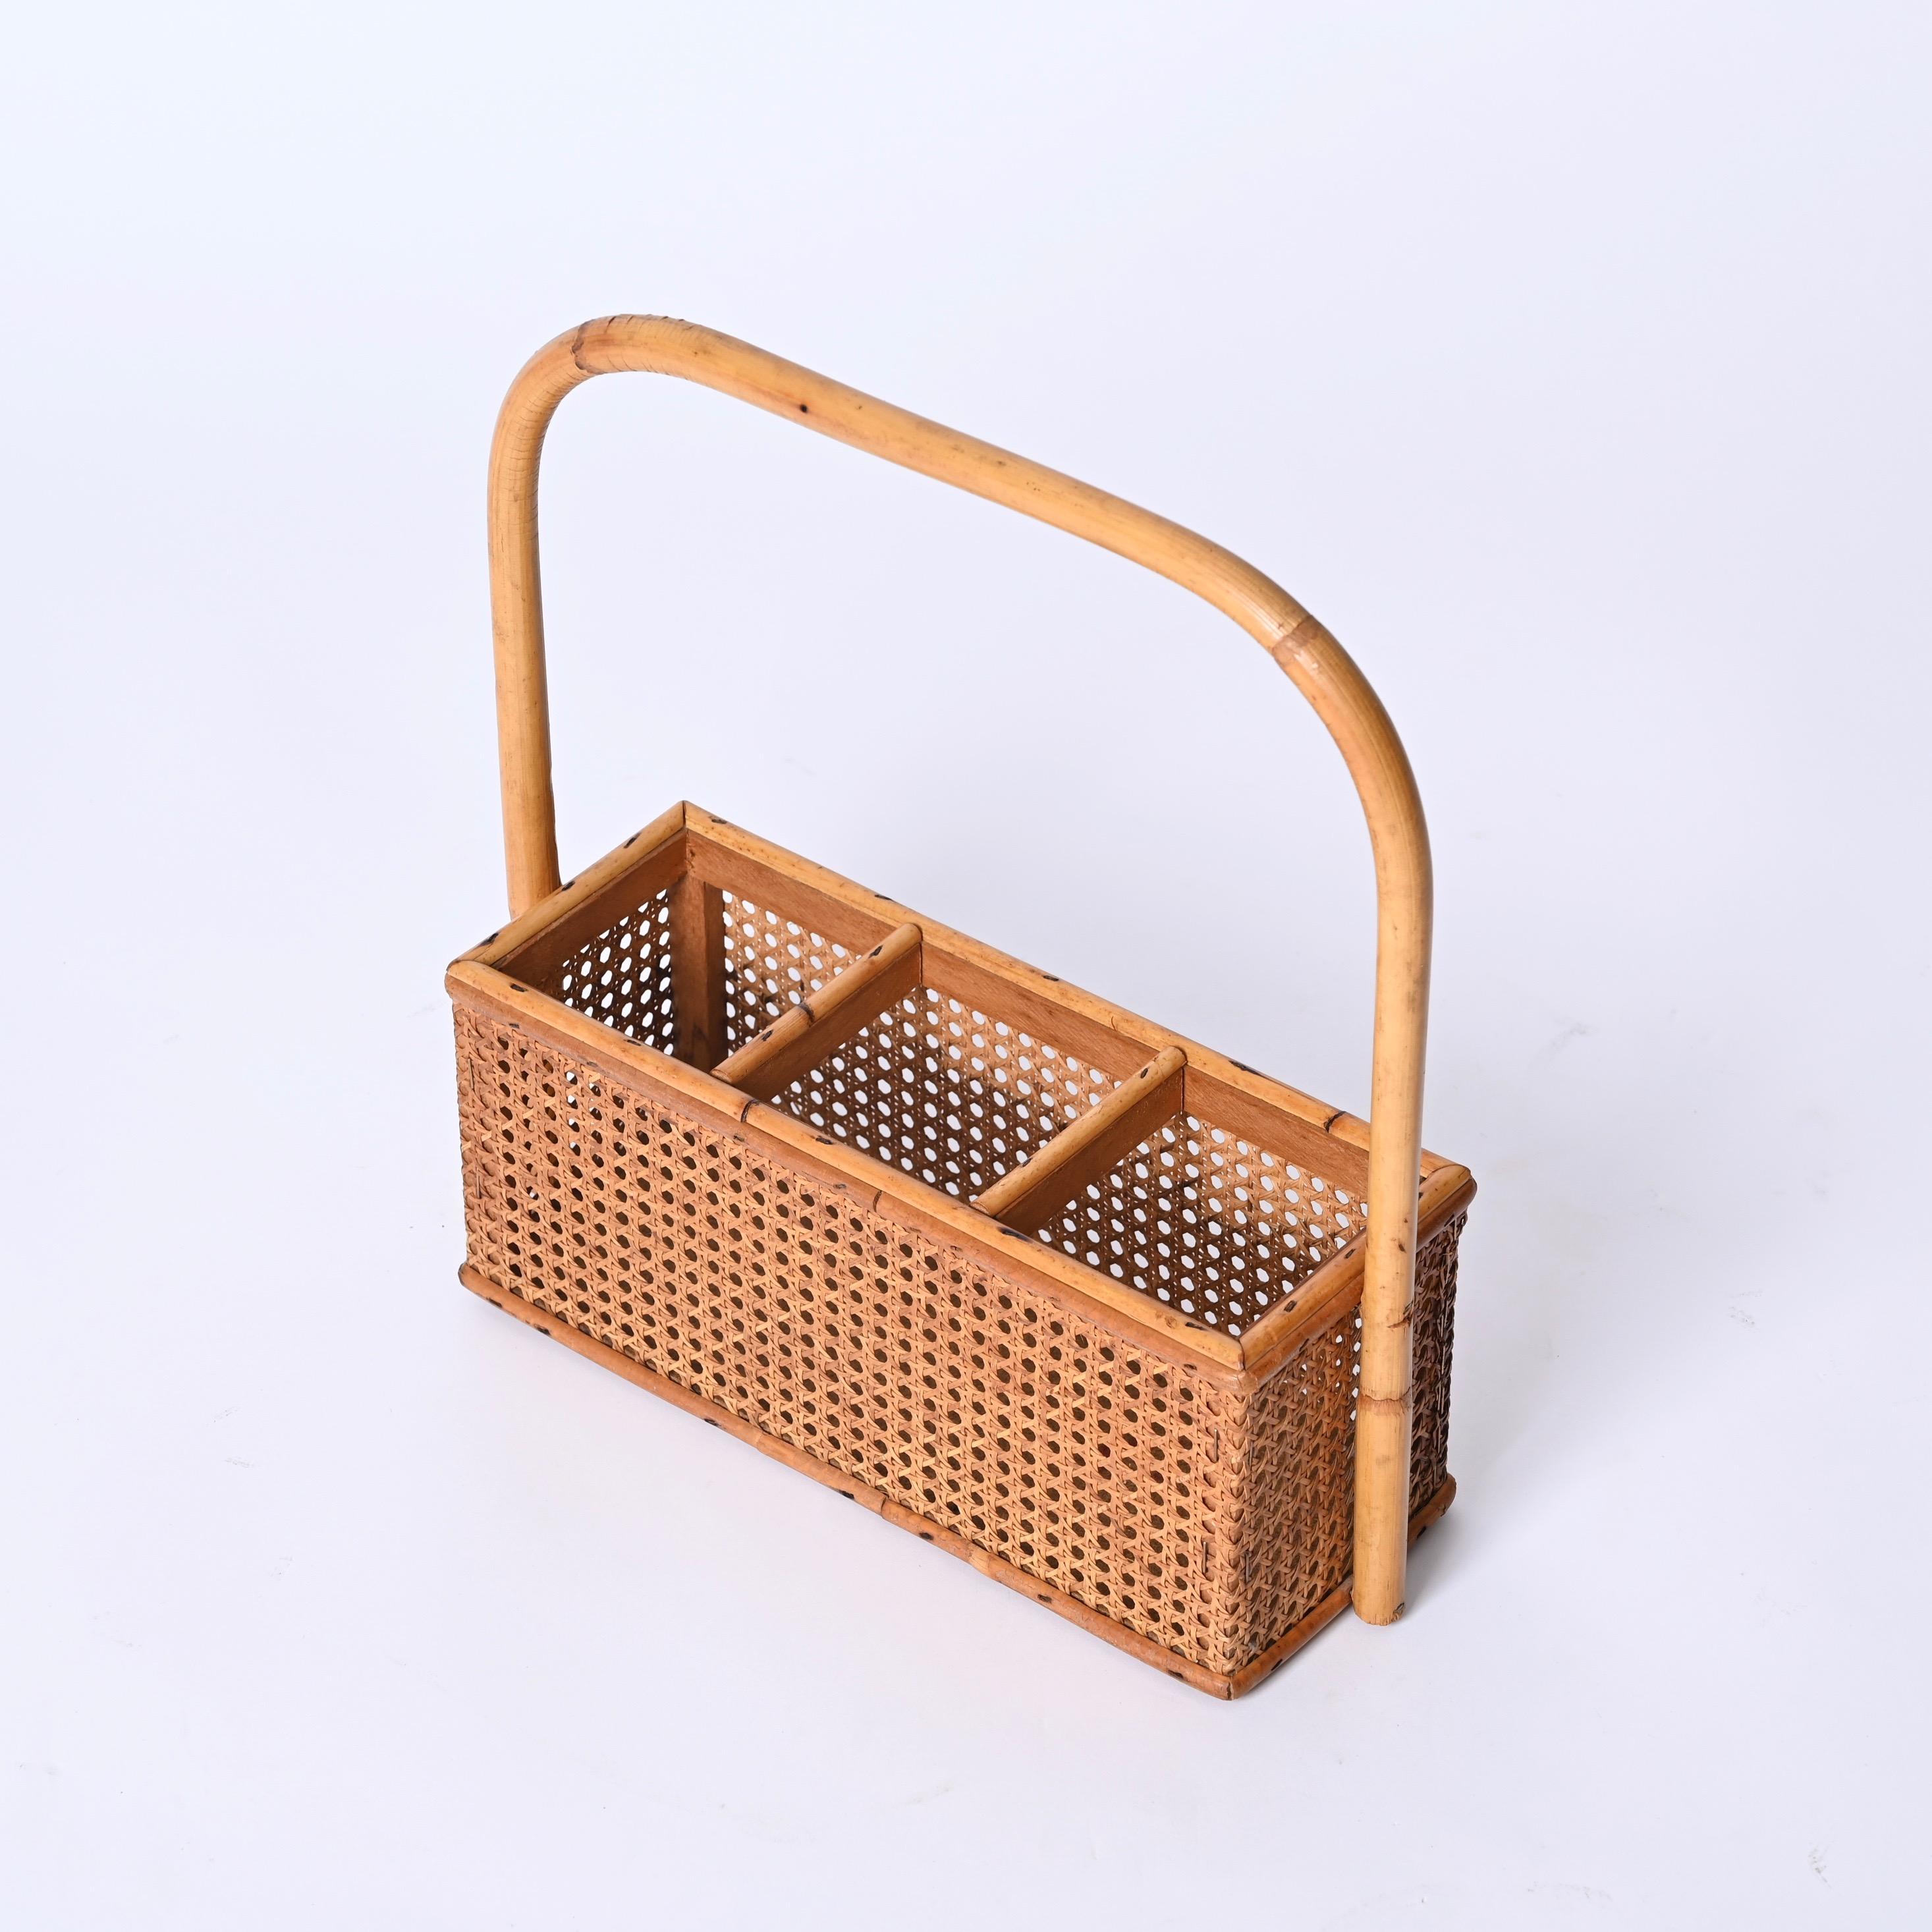 Lovely Mid-Century French Riviera style wine rack in rattan and Vienna Straw with handle in curved bamboo. This gorgeous piece was designed in Italy in the 1970s.

Fully hand-made with perfect proportions this beautiful bottle holder will complement